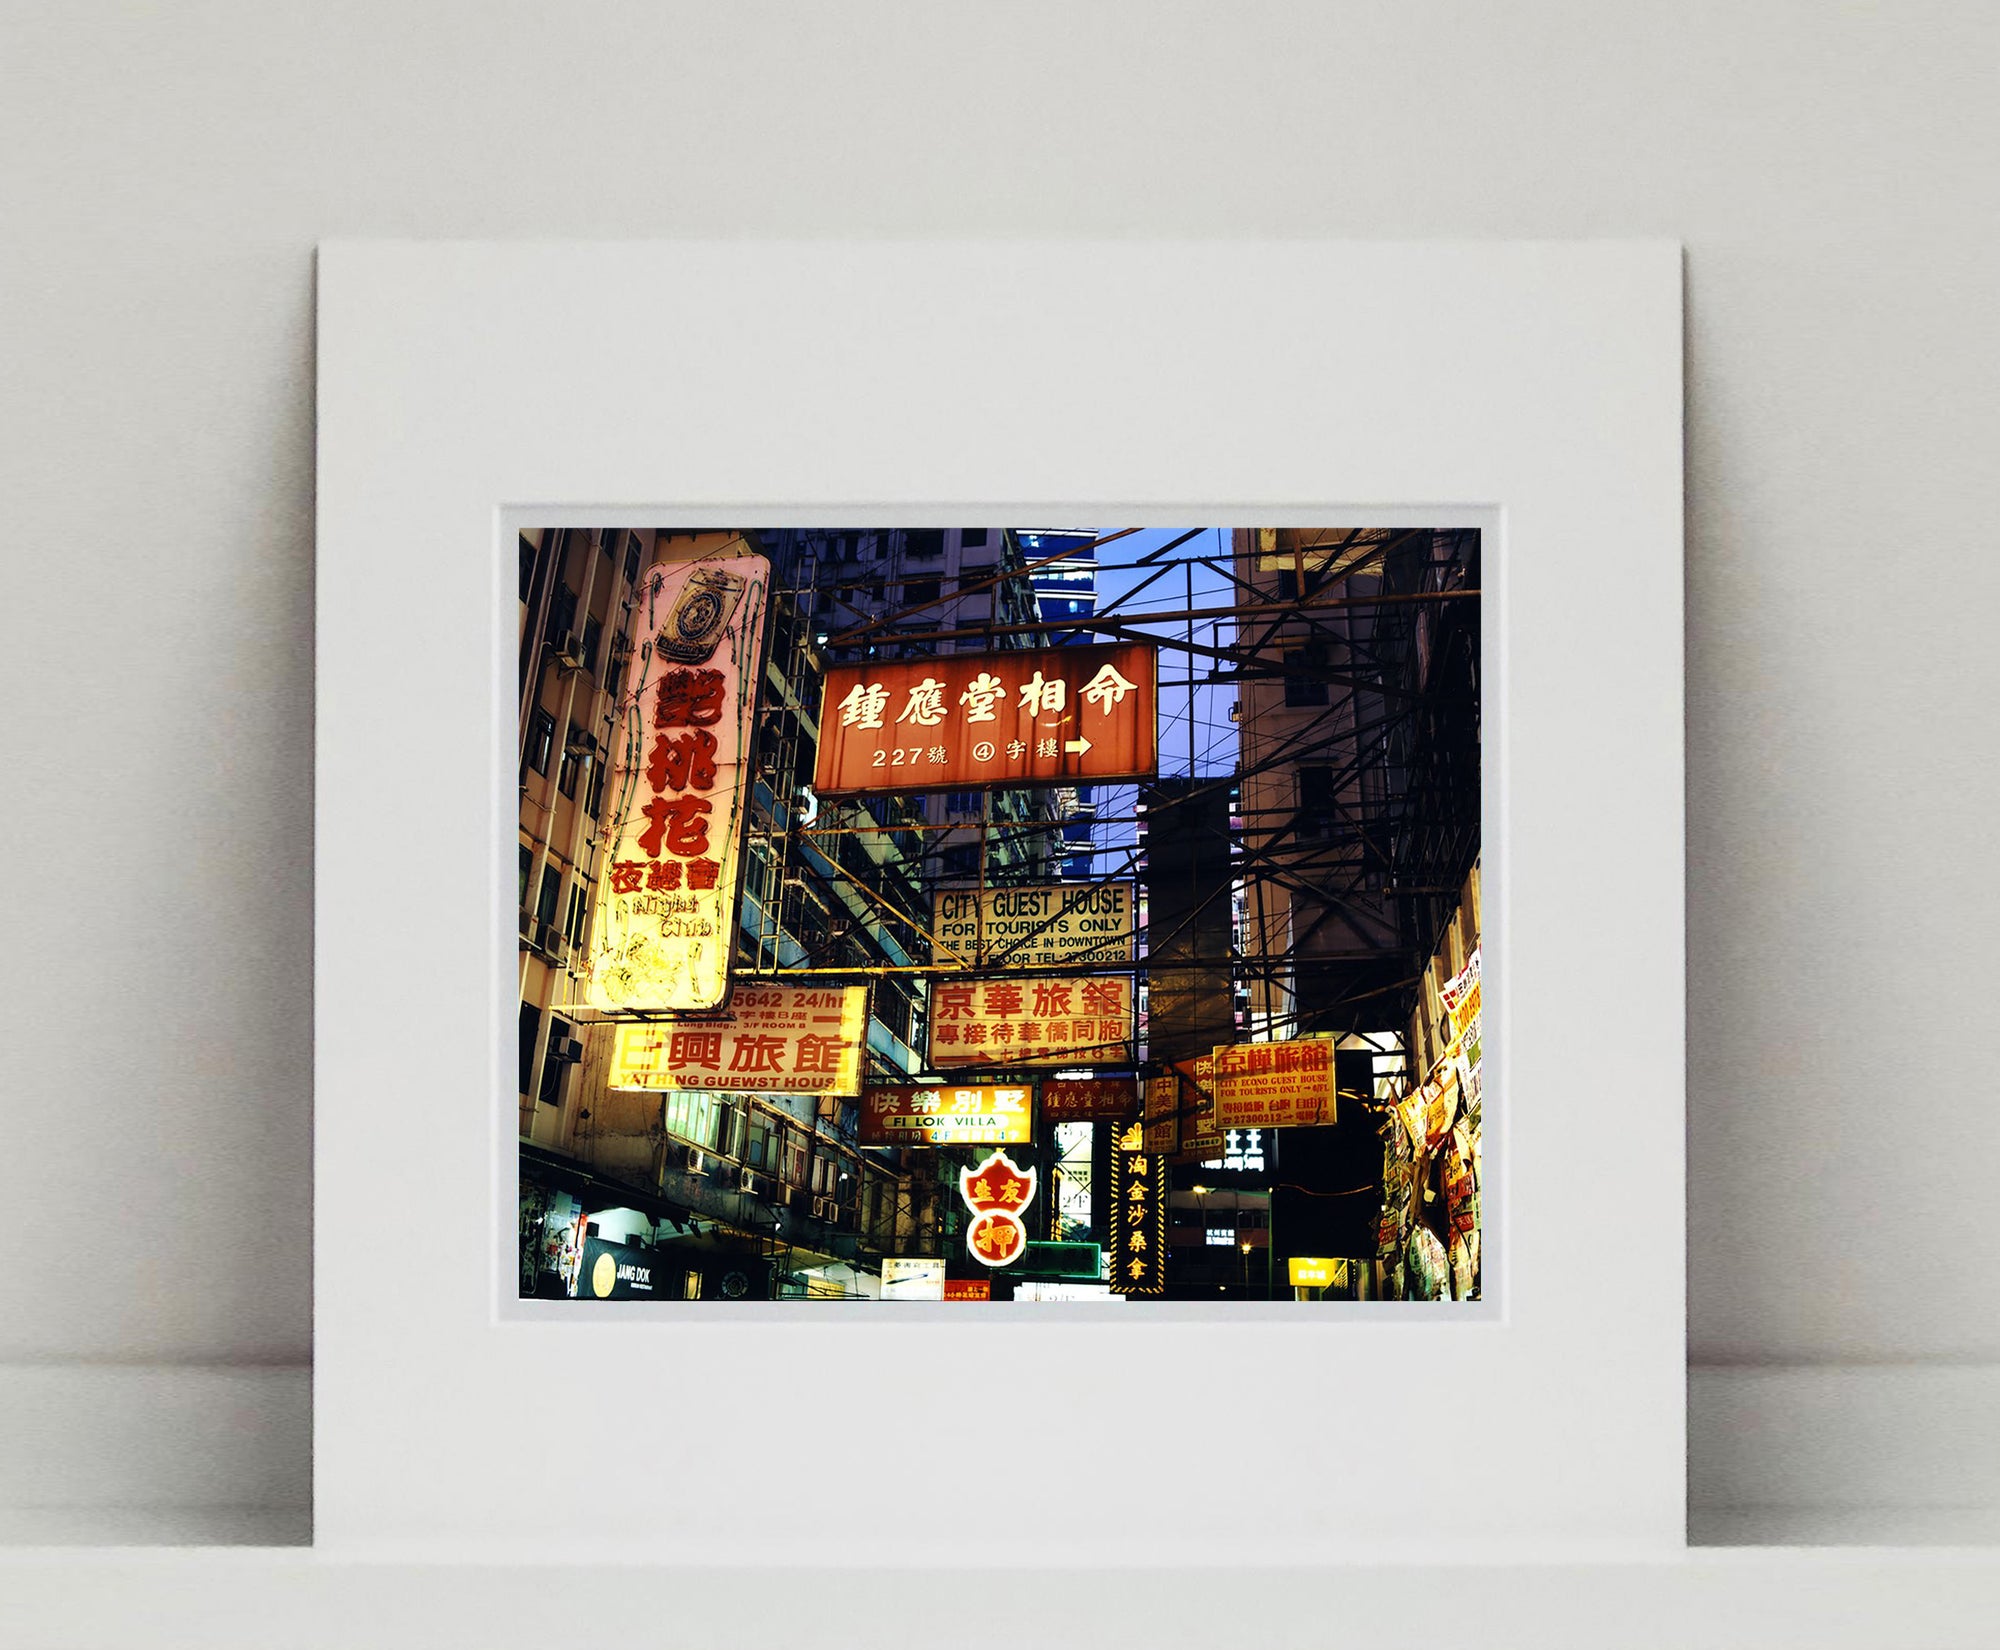 Best Choice in Downtown, captured by Richard Heeps in Kowloon in 2016, this piece perfectly captures the layers of Hong Kong. As a photographer Richard is always looking at what truly represents a place and when you think of Hong Kong the streets and overcrowded signs come to mind. The signs are no longer allowed to be added to so in time this effect will become something of the past.